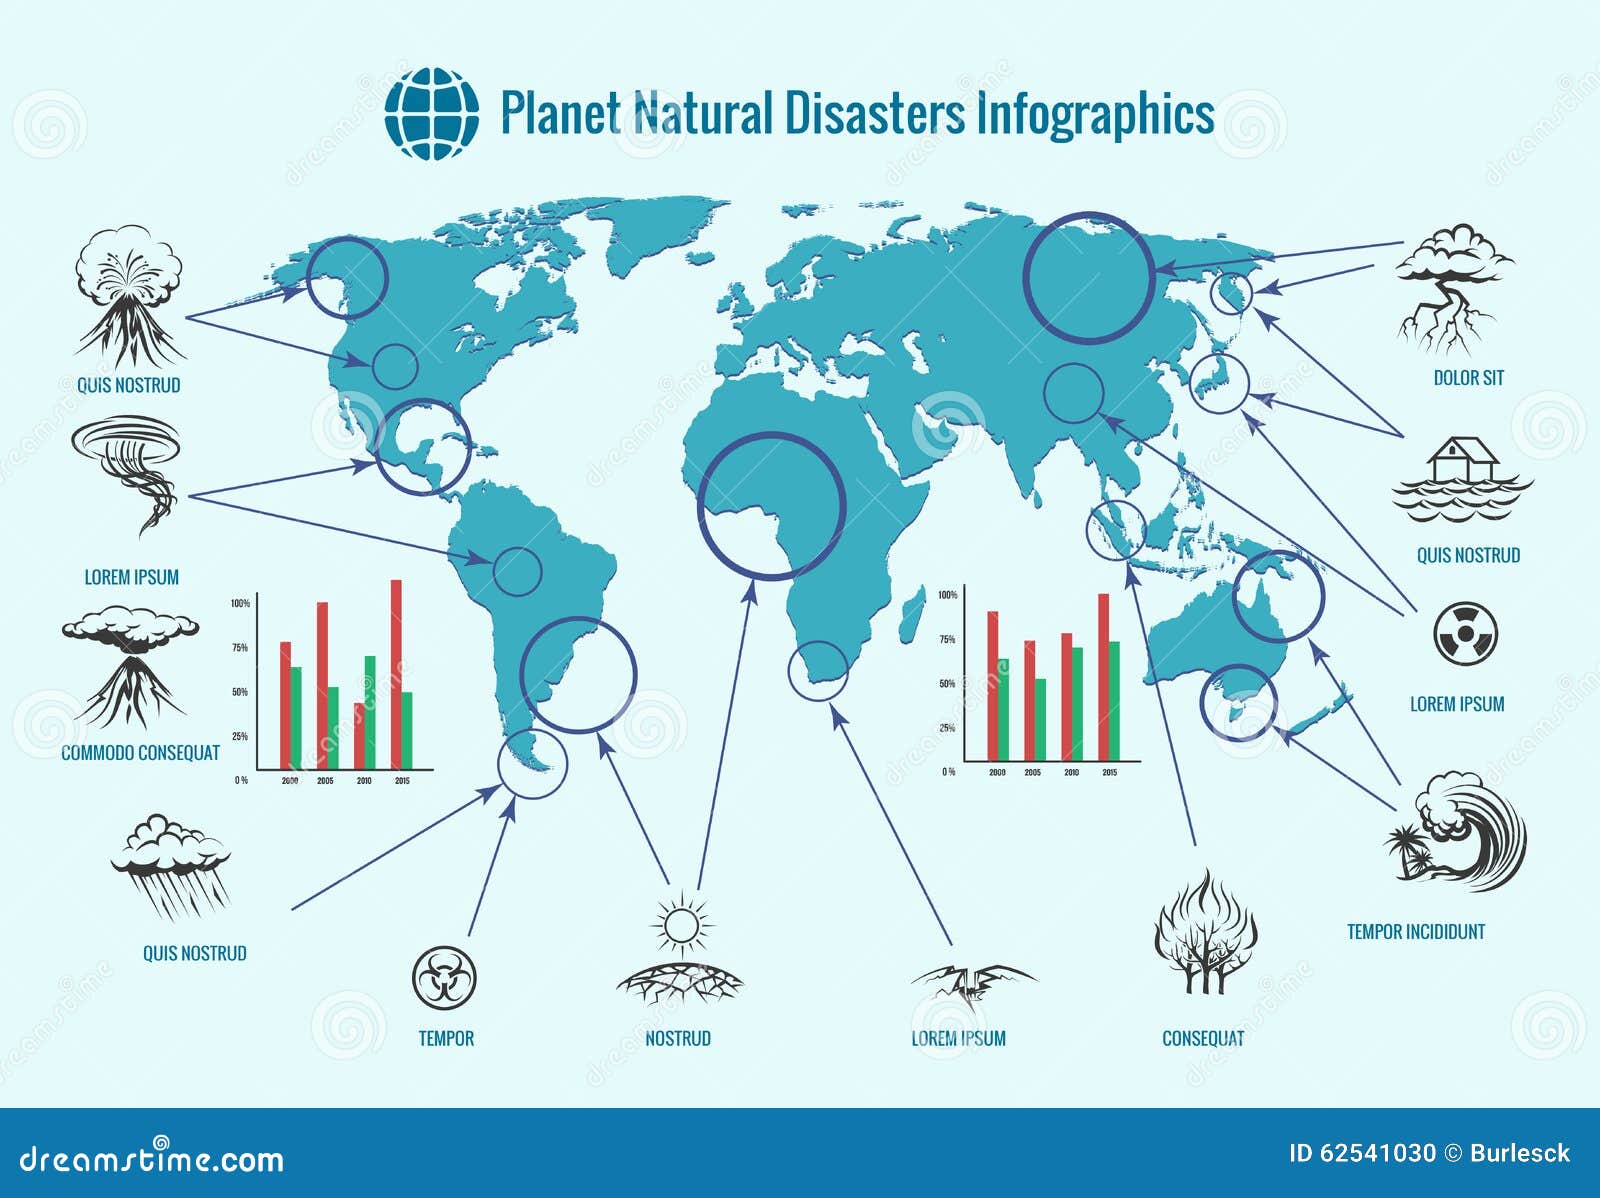 planet natural disasters infographics